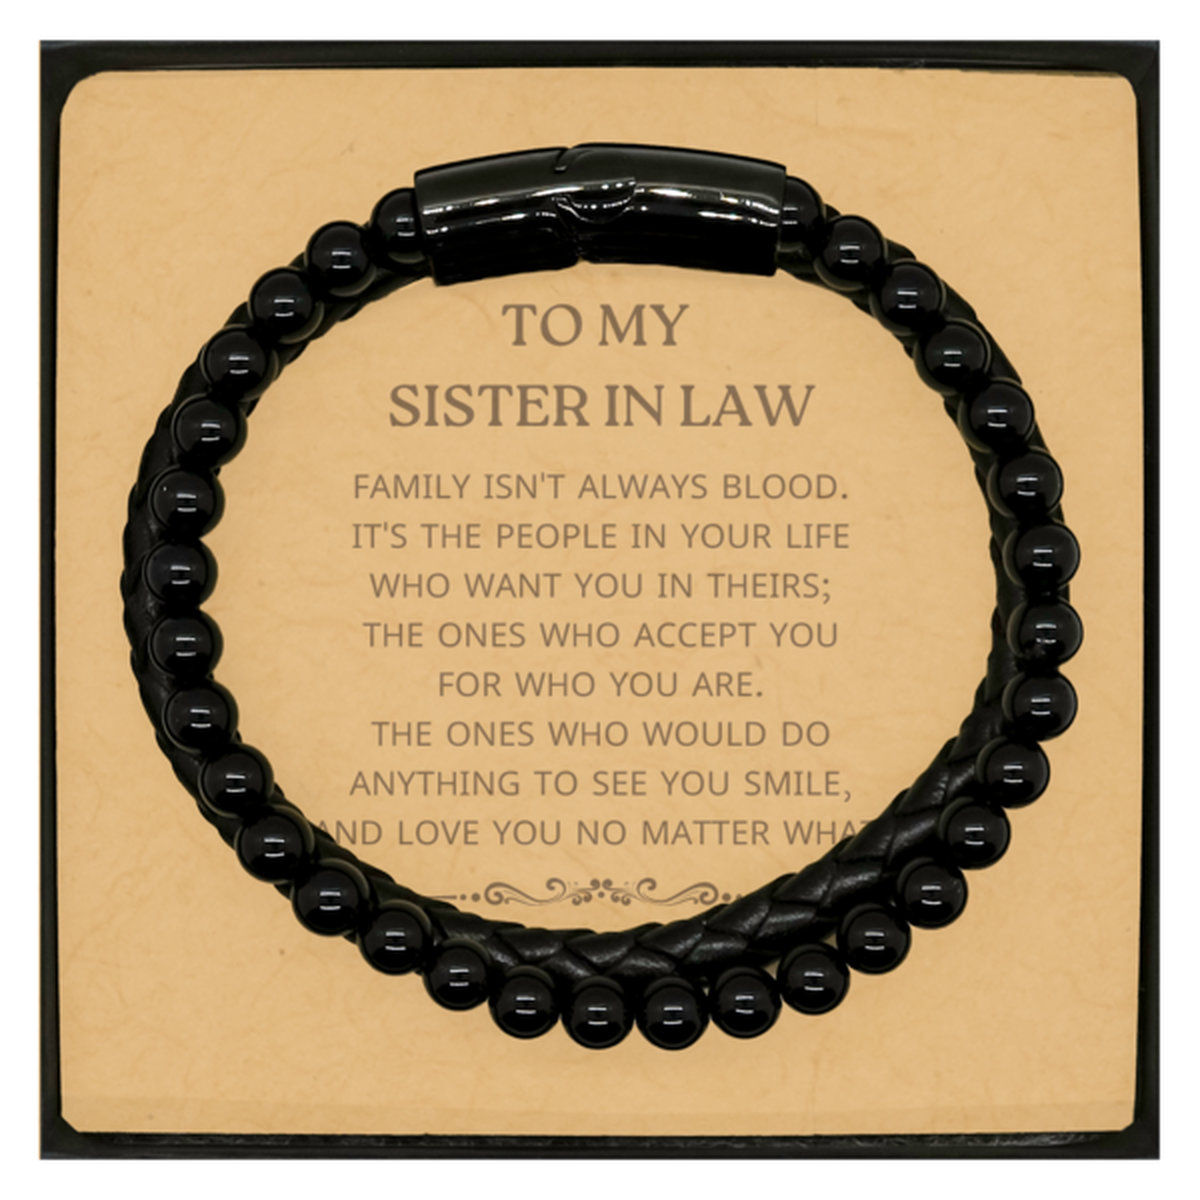 To My Sister In Law Gifts, Family isn't always blood, Sister In Law Stone Leather Bracelets, Birthday Christmas Unique Present For Sister In Law